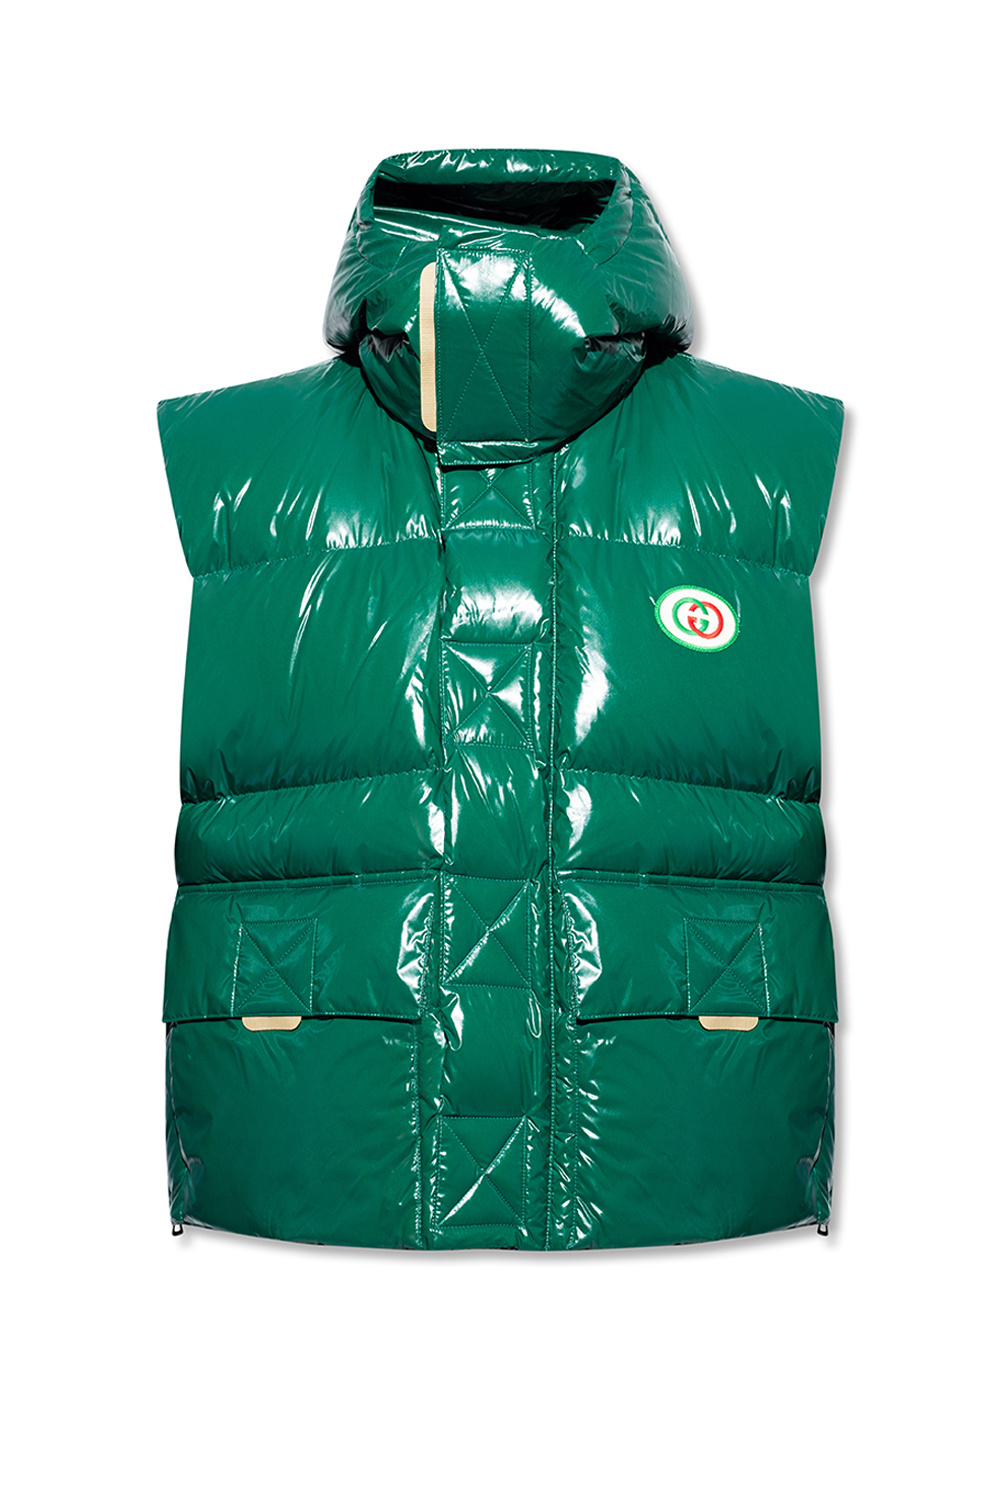 IetpShops | gucci leather bomber jacket with gg blade item Men's Clothing Gucci Down vest